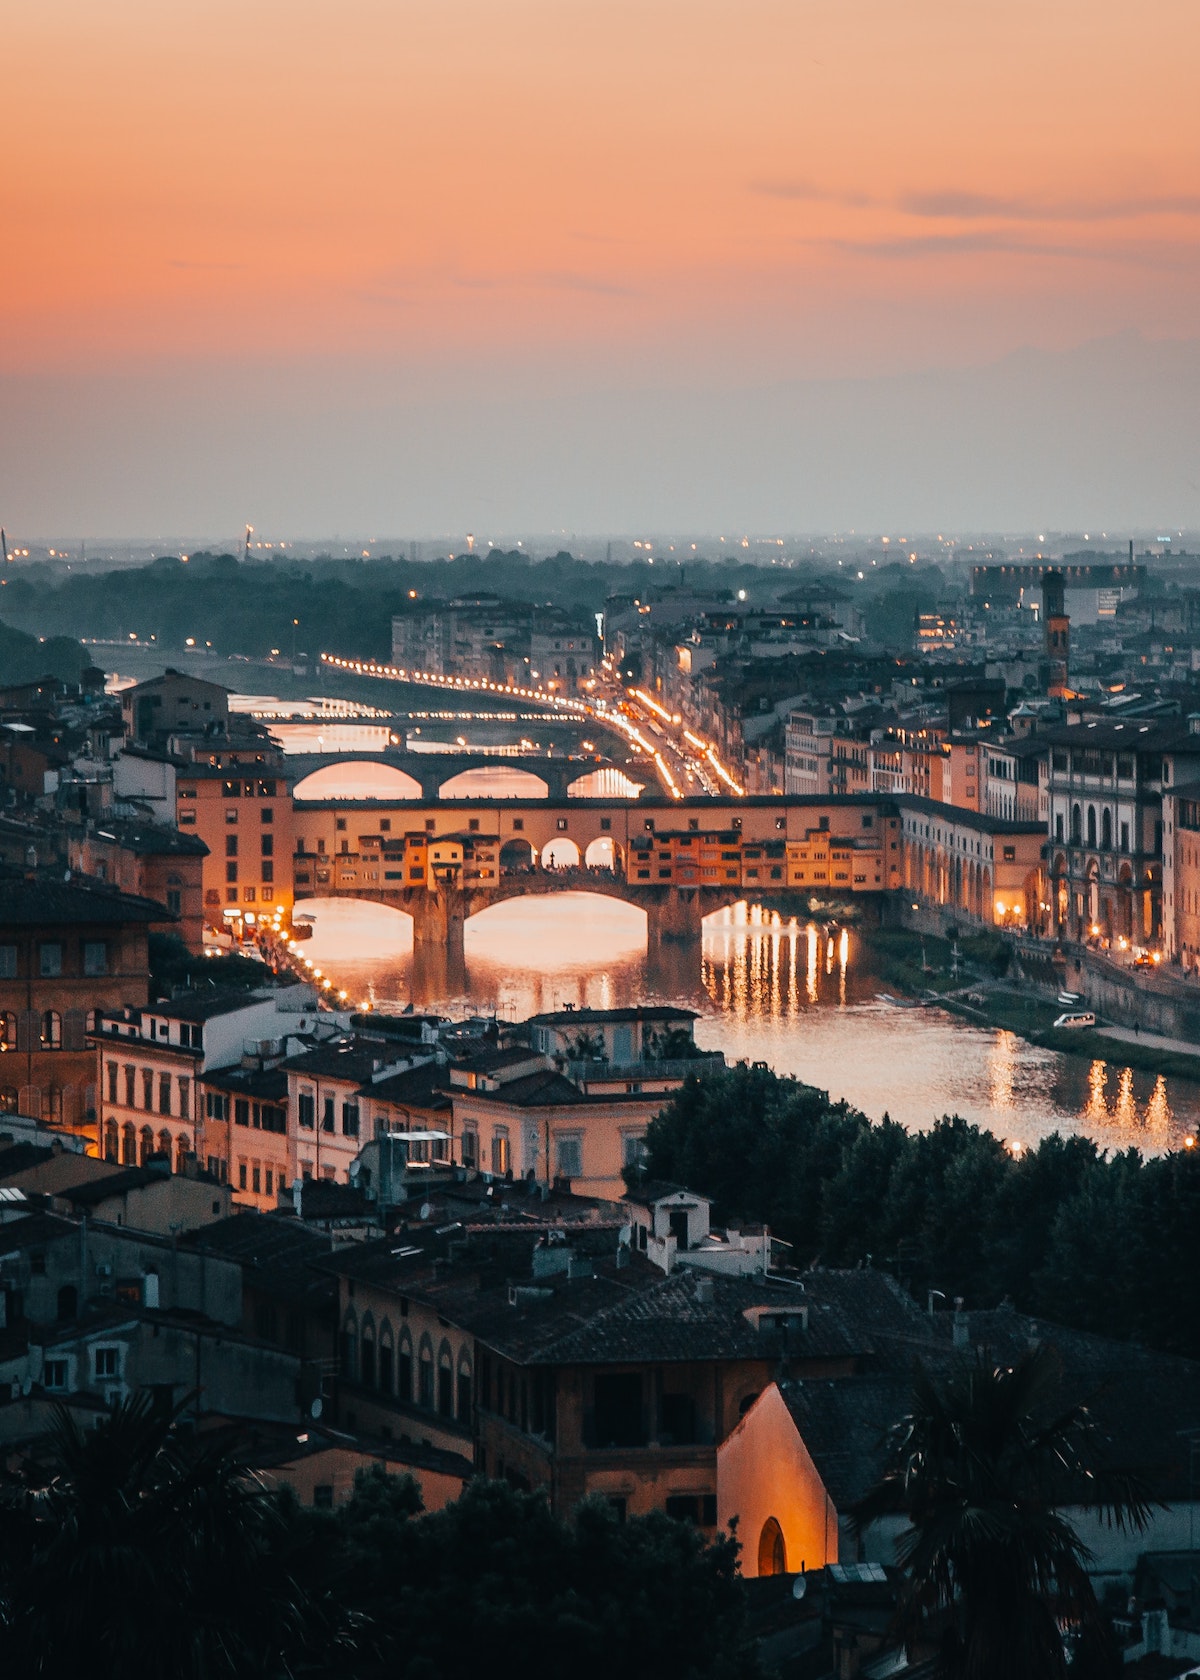 Bridges over the river in Florence, Italy at sunset